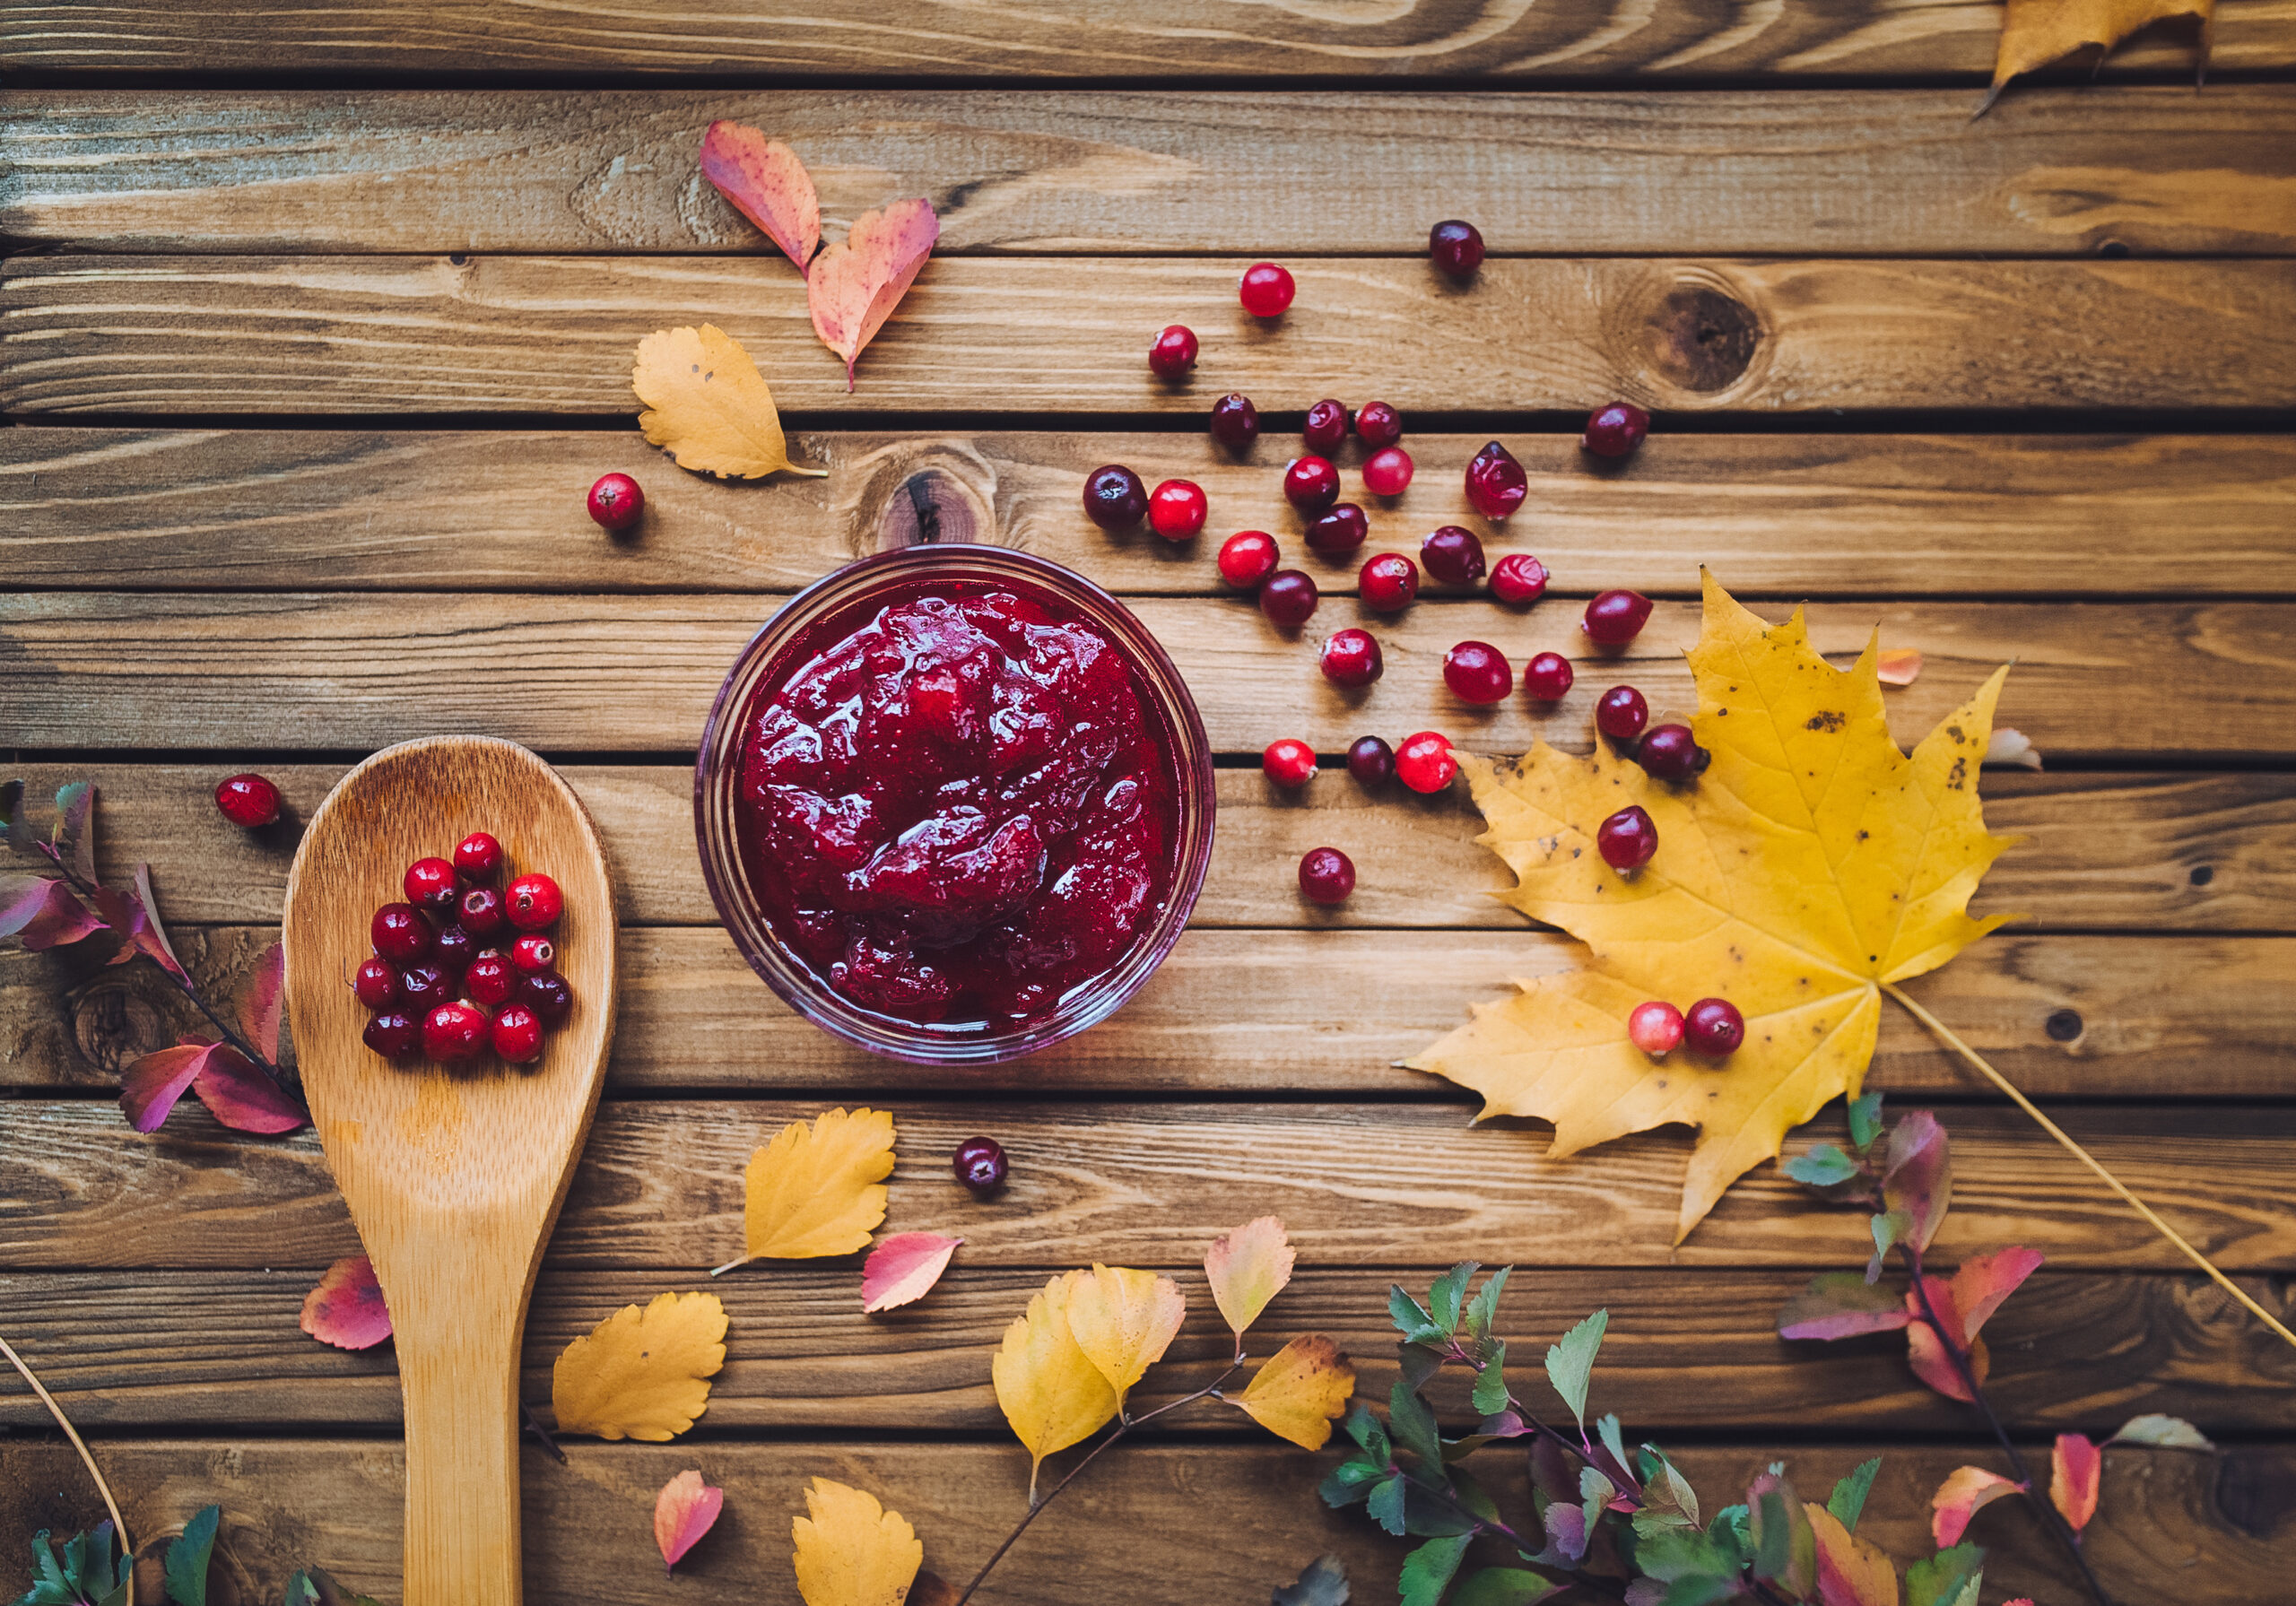 A wood-plank table with a wooden spoon holding several cranberries beside a small glass bowl holding prepared cranberry sauce surrounded by loose cranberries and a small assortment of leaves in autumn colors